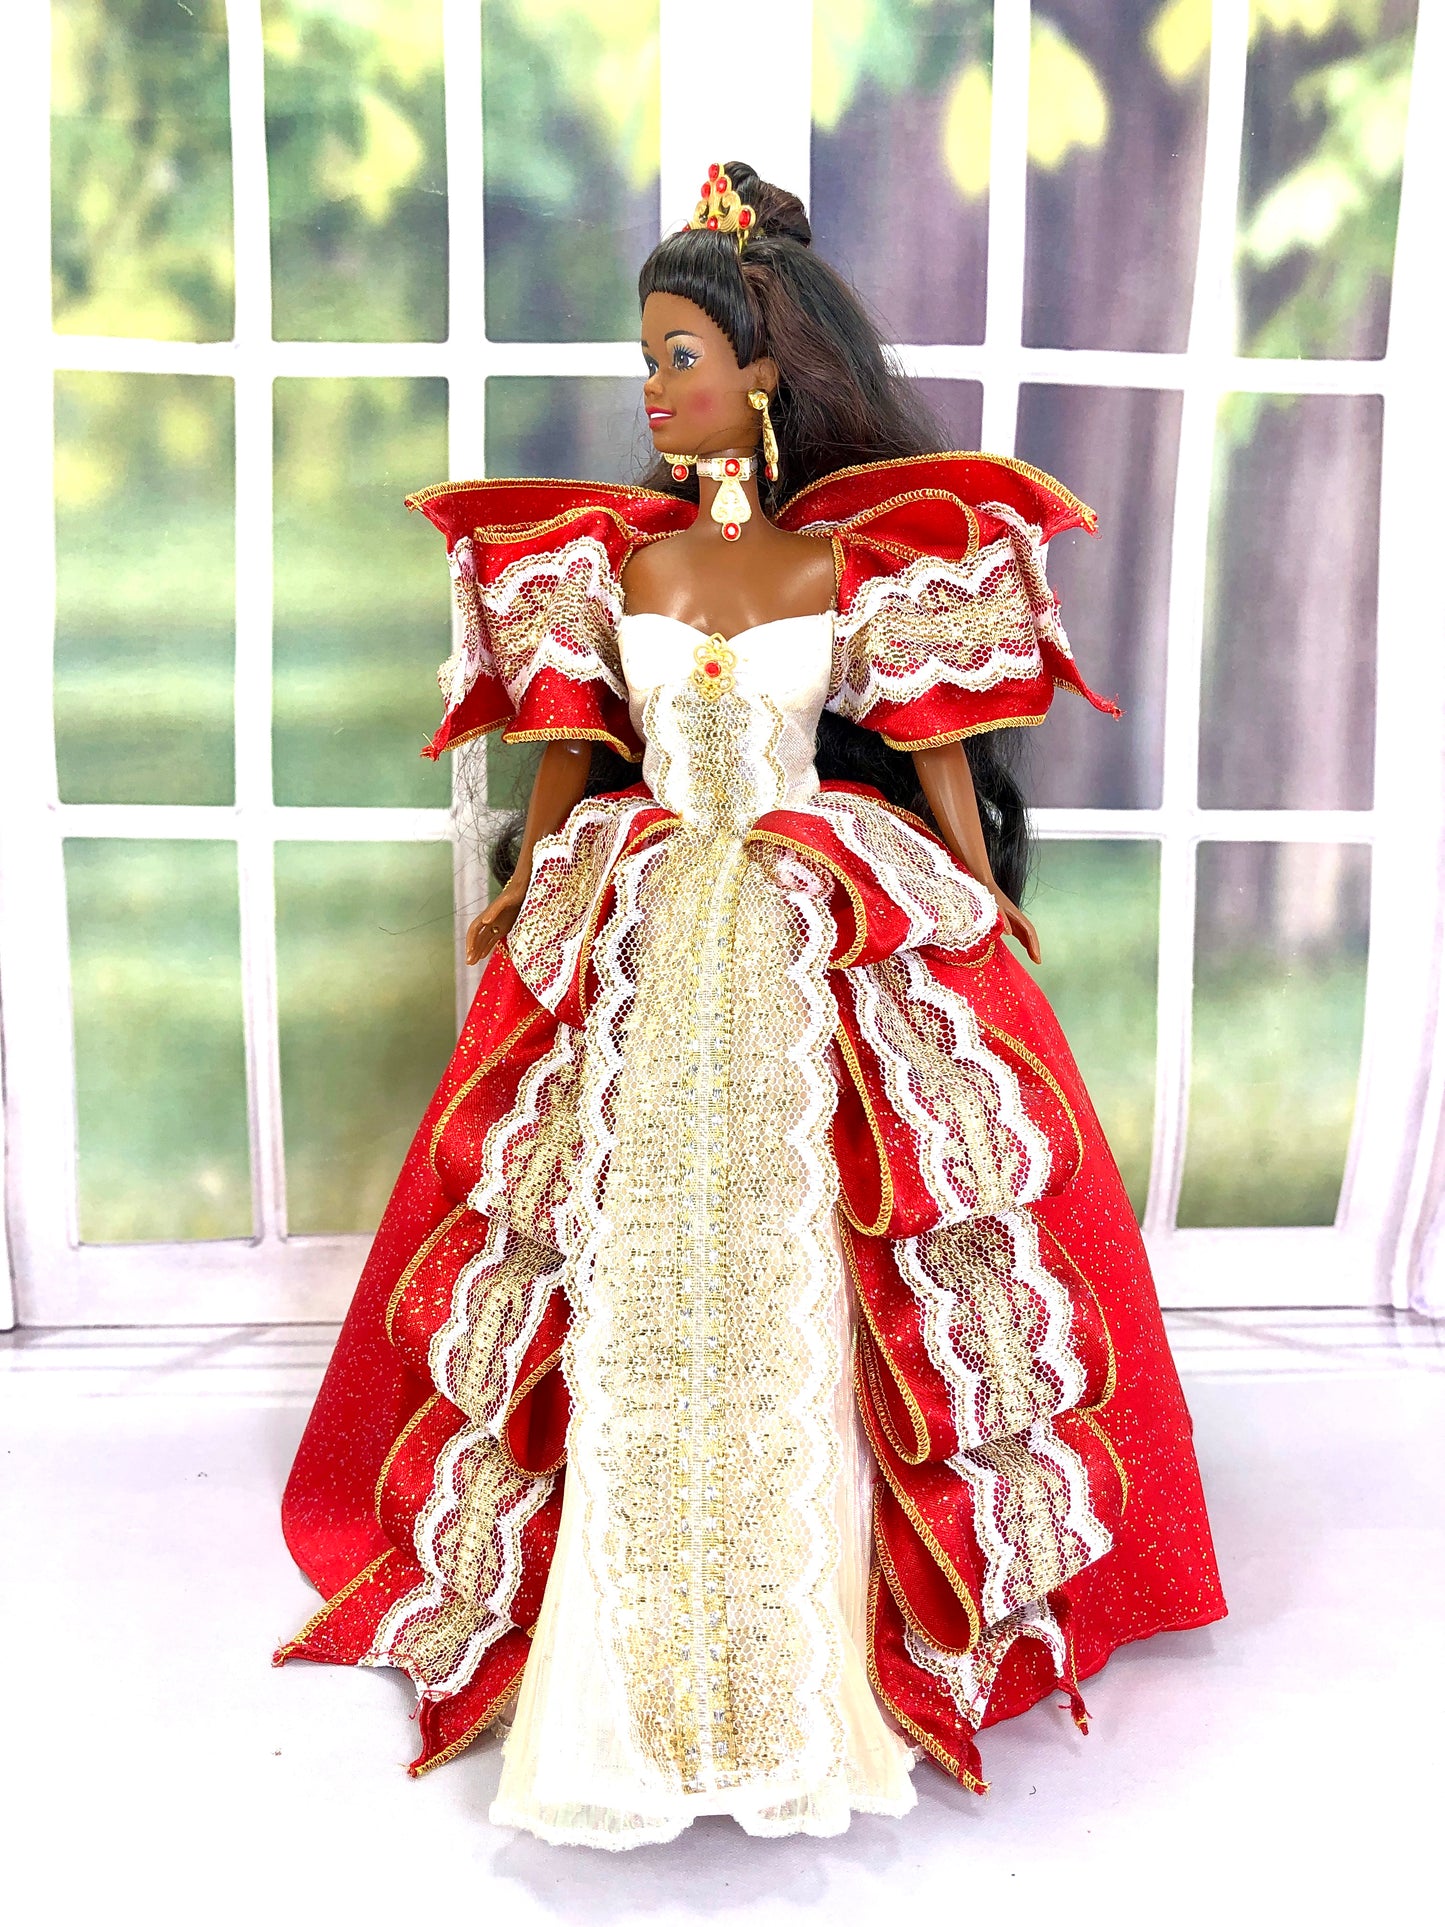 Pre-Owned Happy Holidays Barbie Doll 1997 African-American 10th Anniversary Special Edition